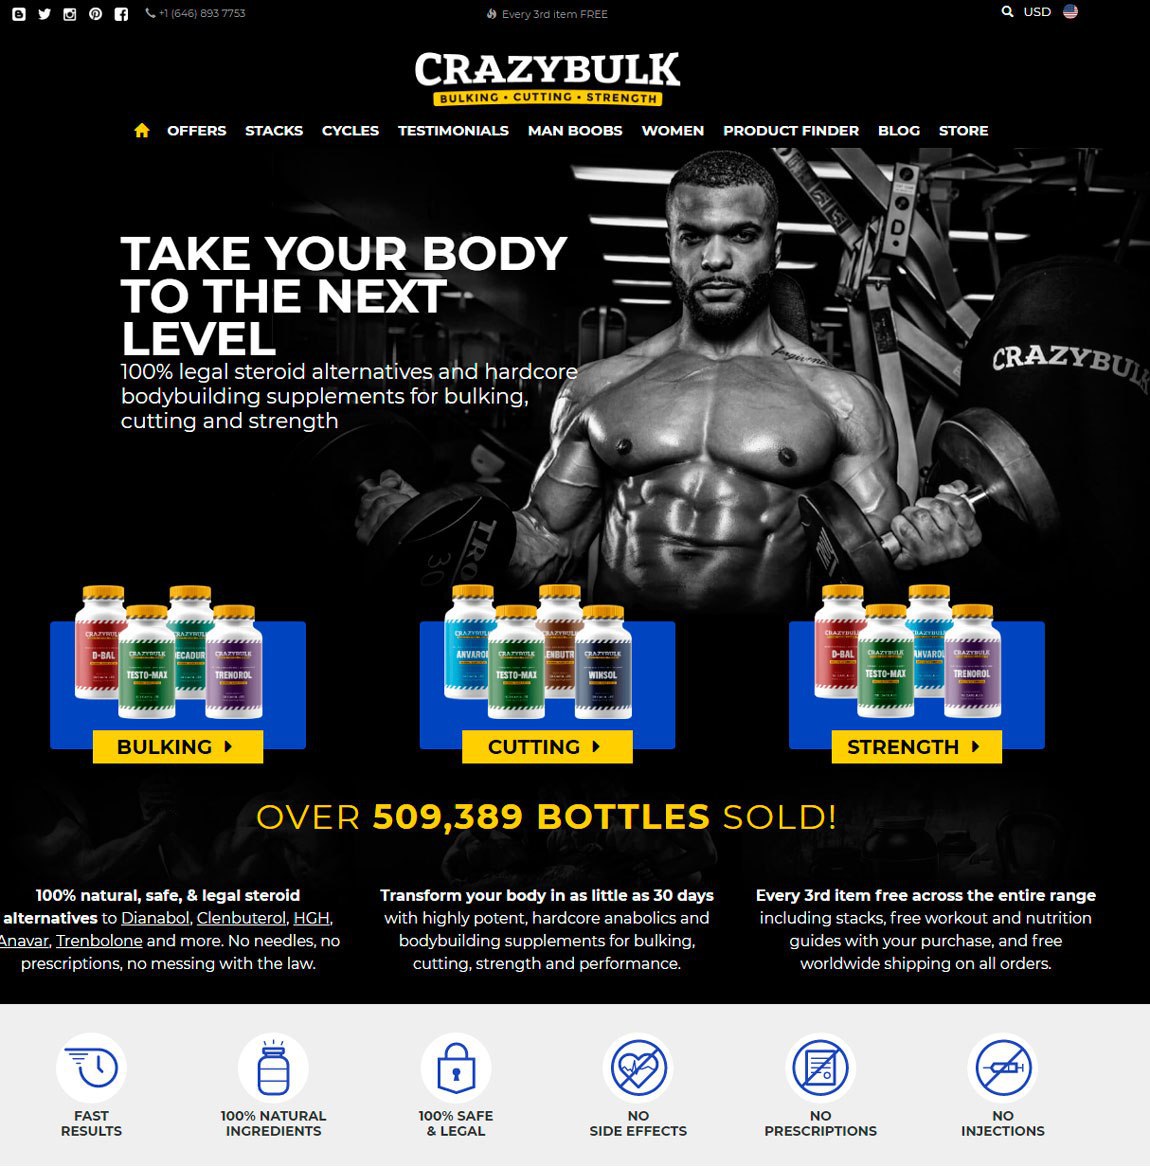 Best way to use clenbuterol for weight loss